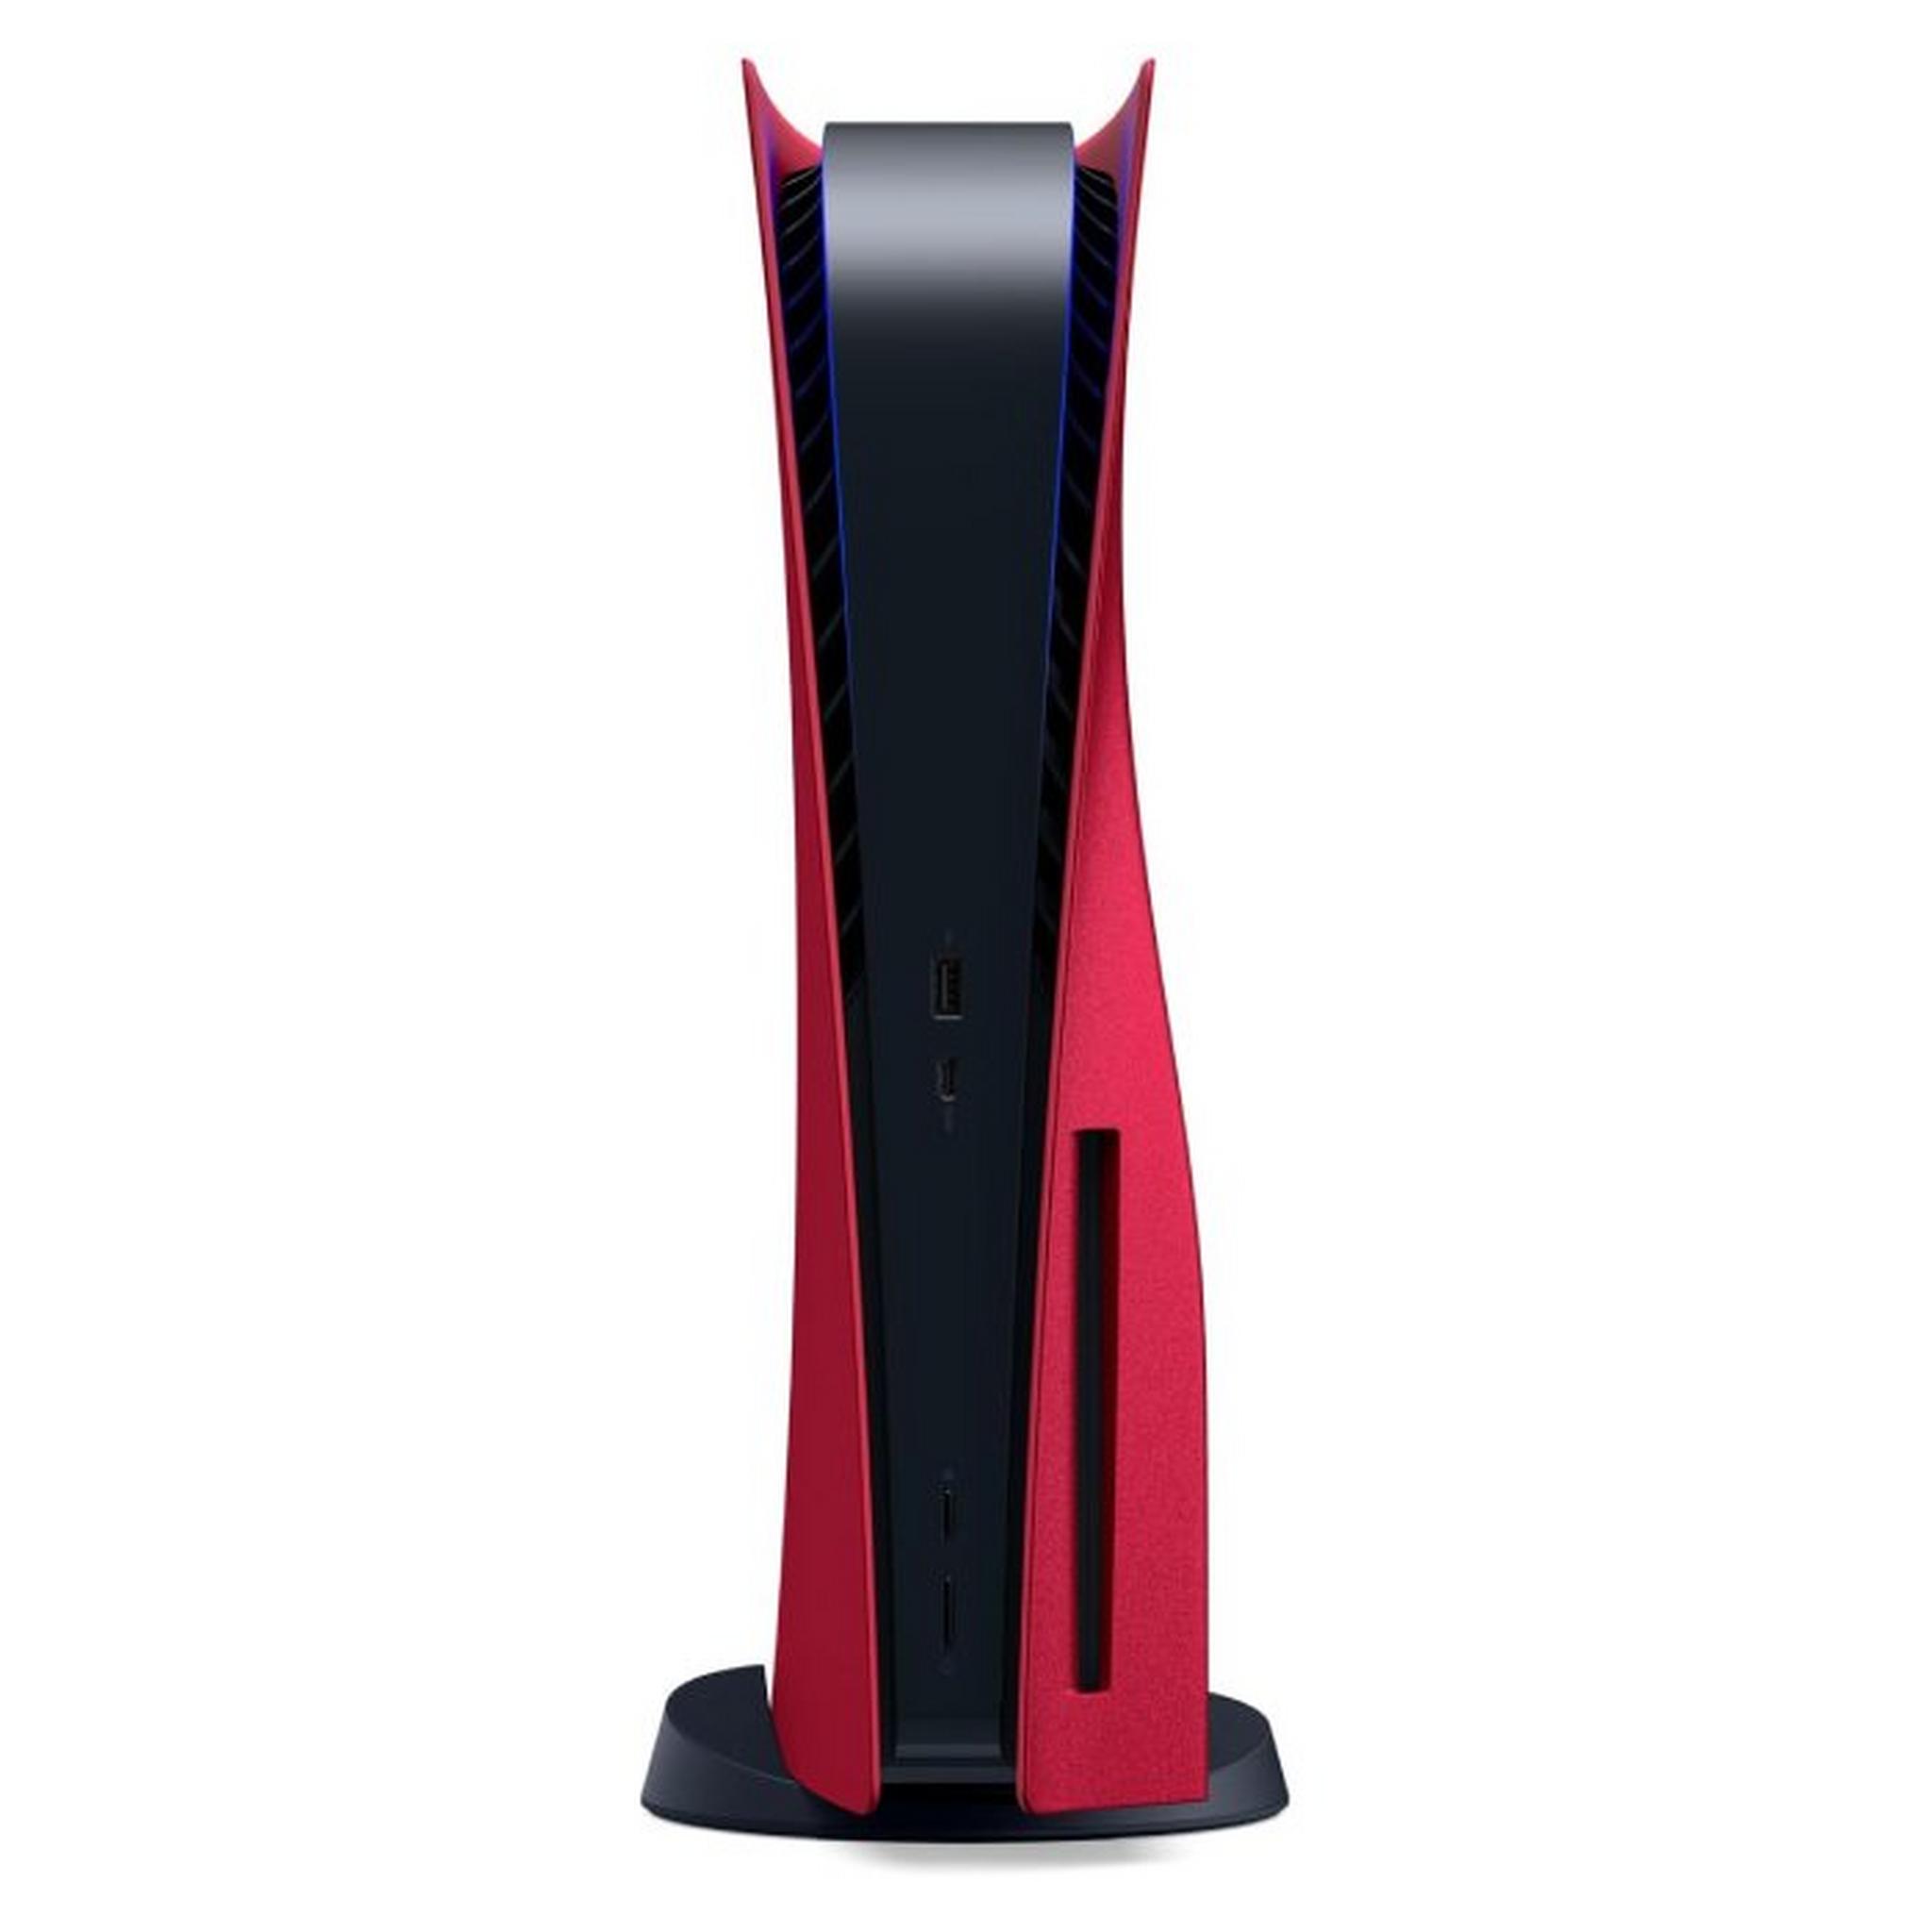 Sony PlayStation 5 standerd Cover Faceplate, CFI-ZCA1W07X/STD - Volcanic Red